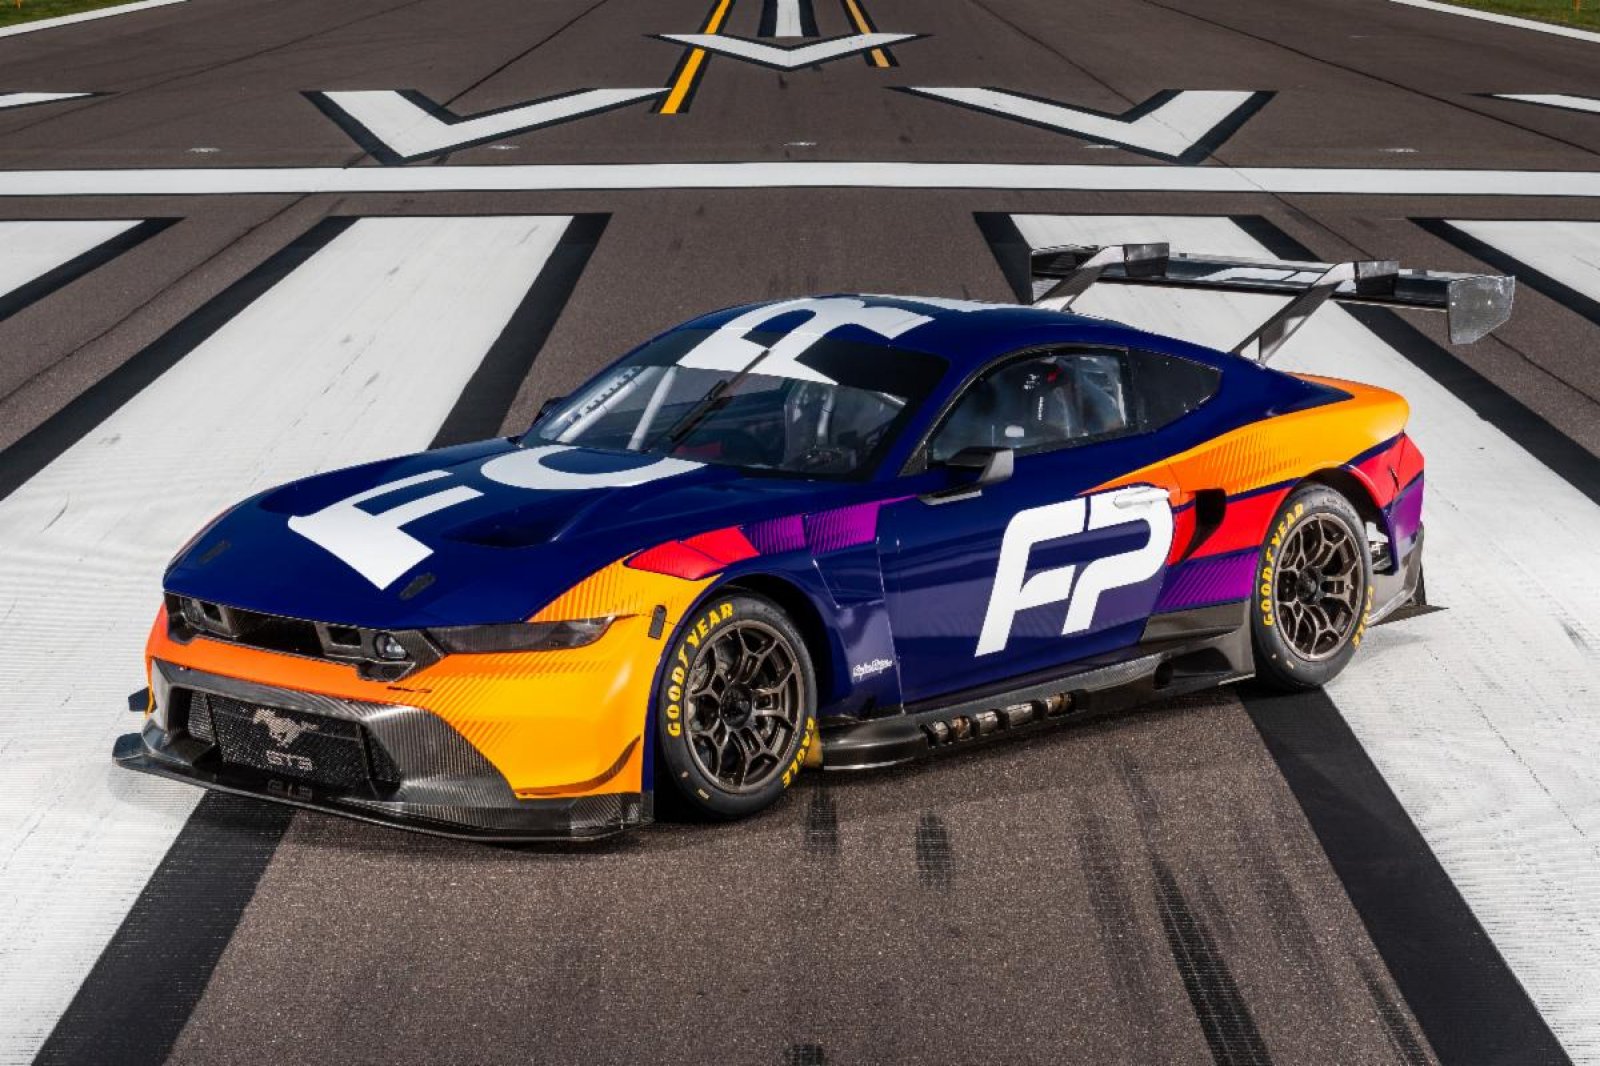 Ford Formally Unveils Mustang GT3 at Le Mans as Classic Circuit, Renowned Race and Iconic Sports Car Converge ﻿